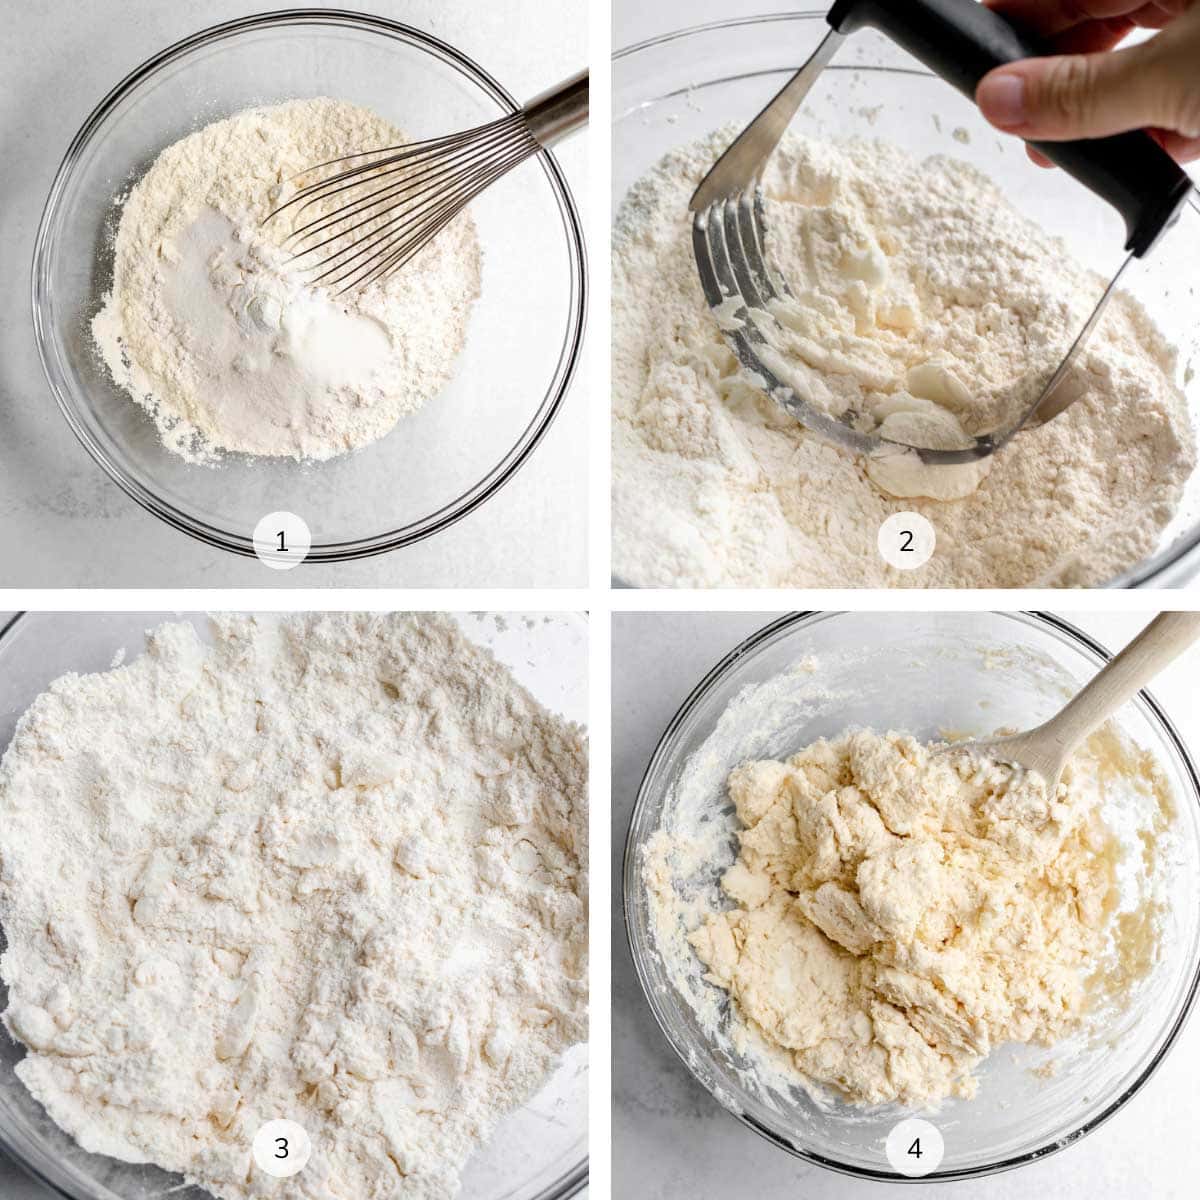 Four images showing how to make buttermilk biscuits labeled 1, 2, 3, 4